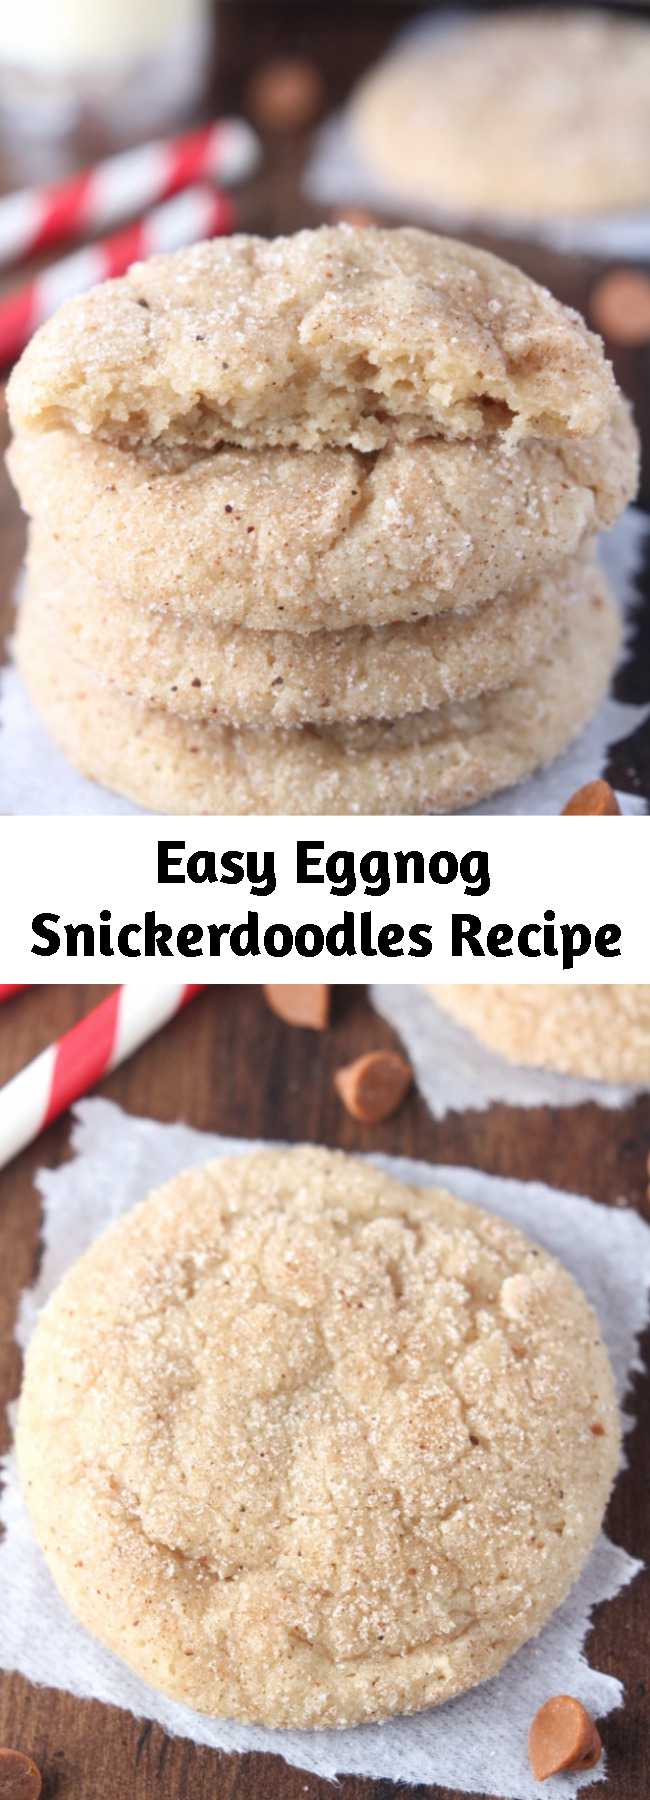 Easy Eggnog Snickerdoodles Recipe - The prominent eggnog flavor in these cookies is really festive for the holiday season! They’re incredibly soft and chewy, and they’ll stay that way for a week if stored in an airtight container—if they last that long!